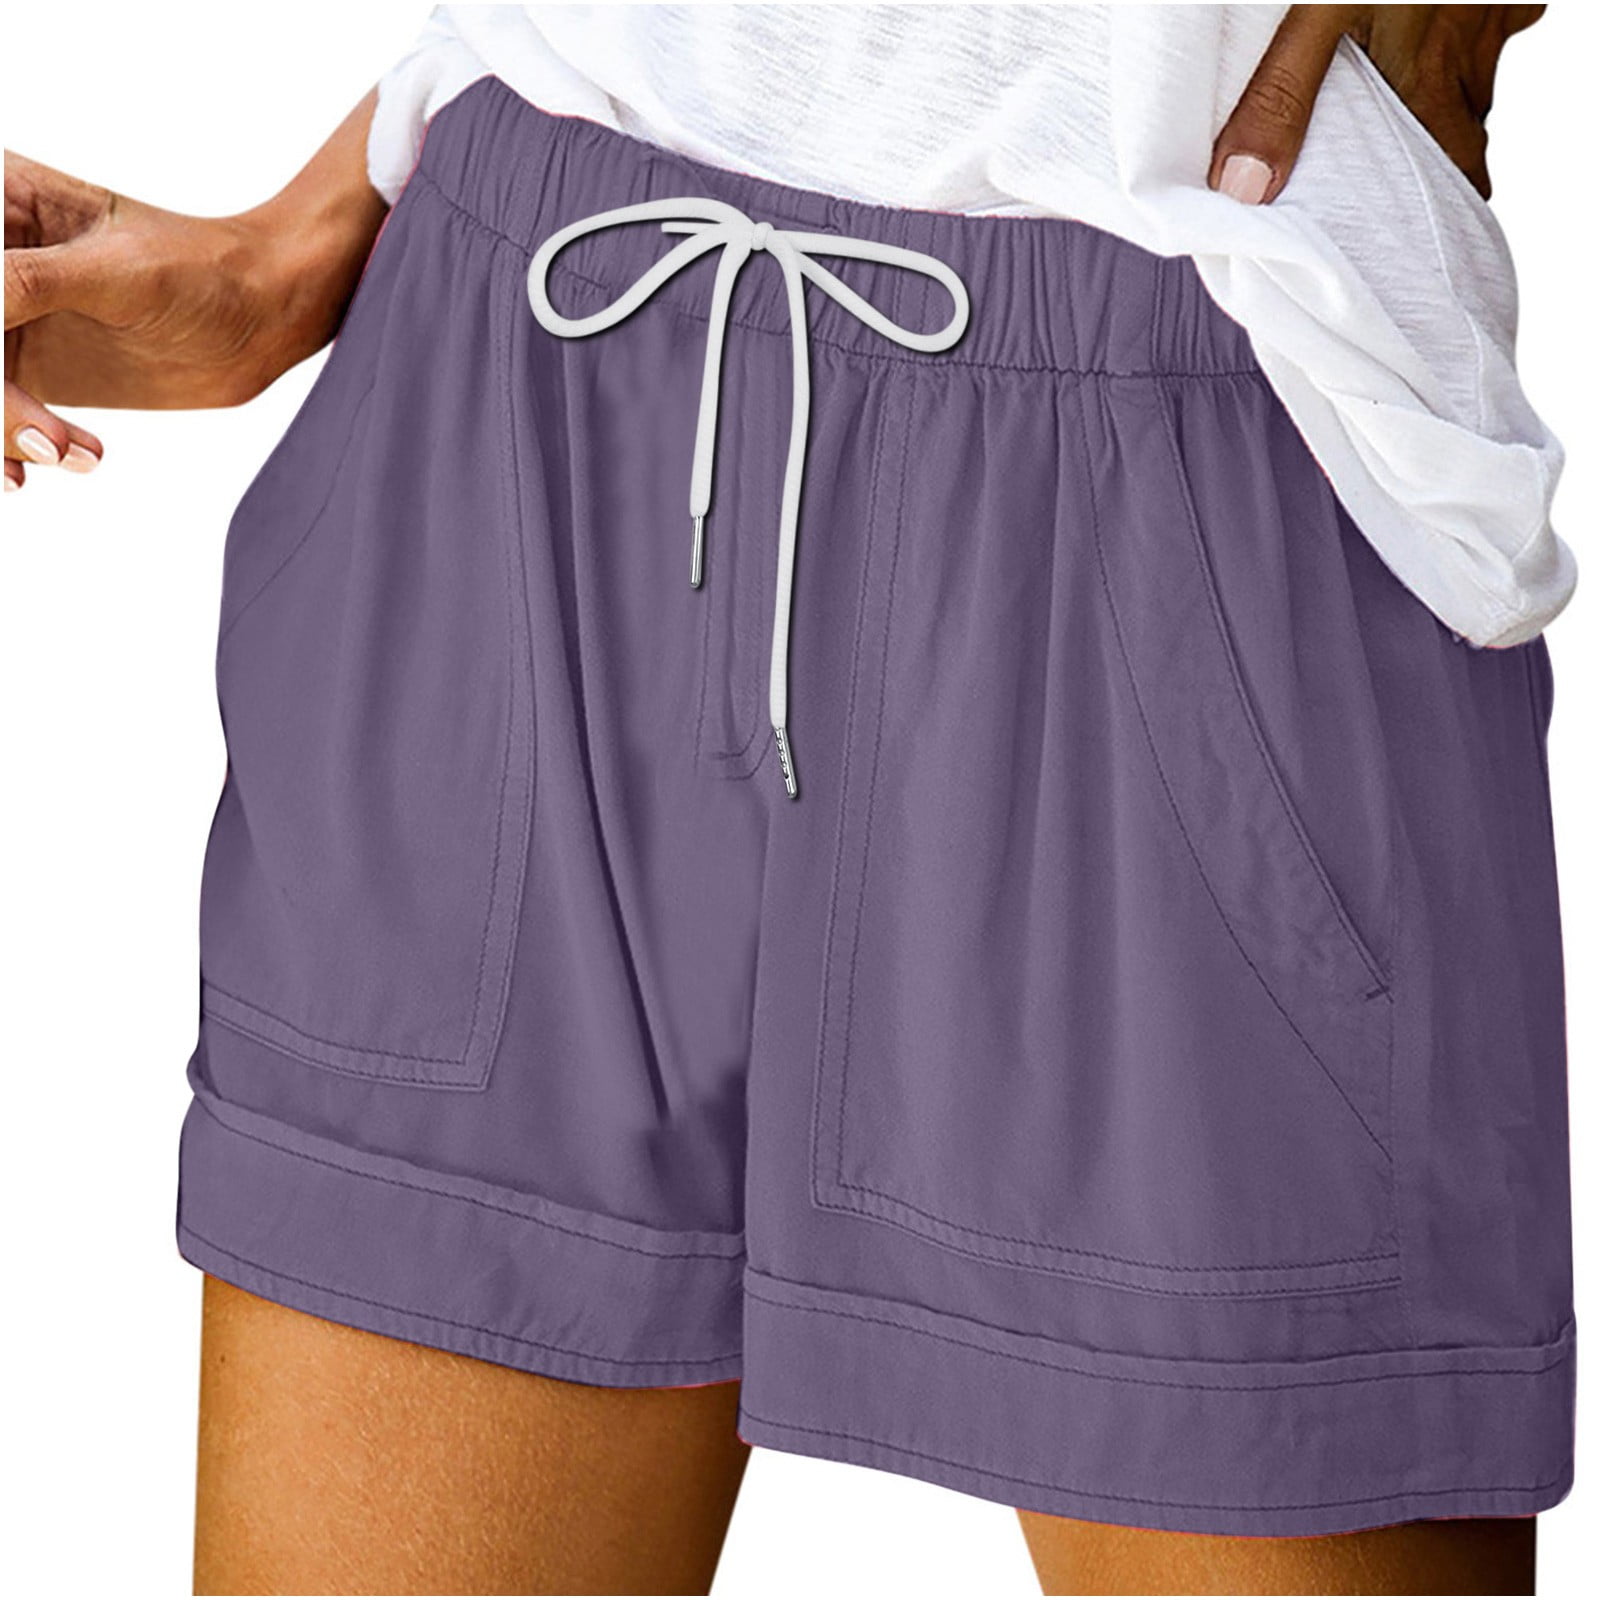 Ecqkame Women Comfy Drawstring Shorts Clearance Women's Solid Casual ...